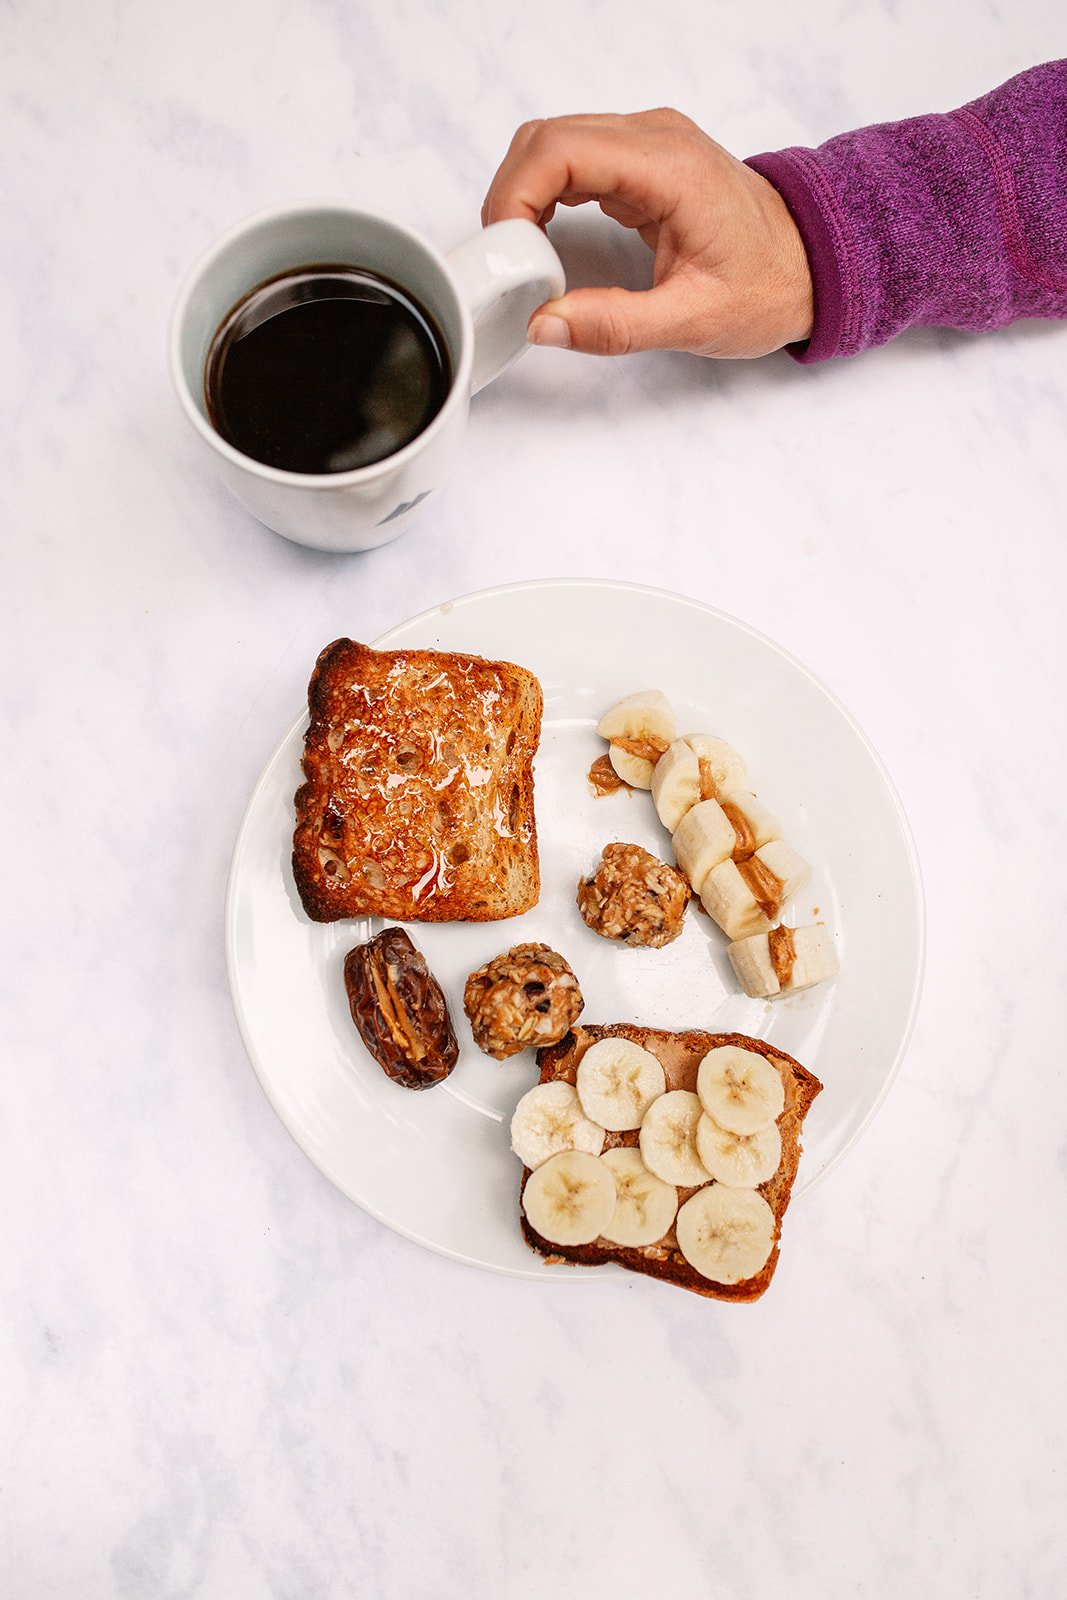 How to wake up early to run - Foods to Eat Before a Run